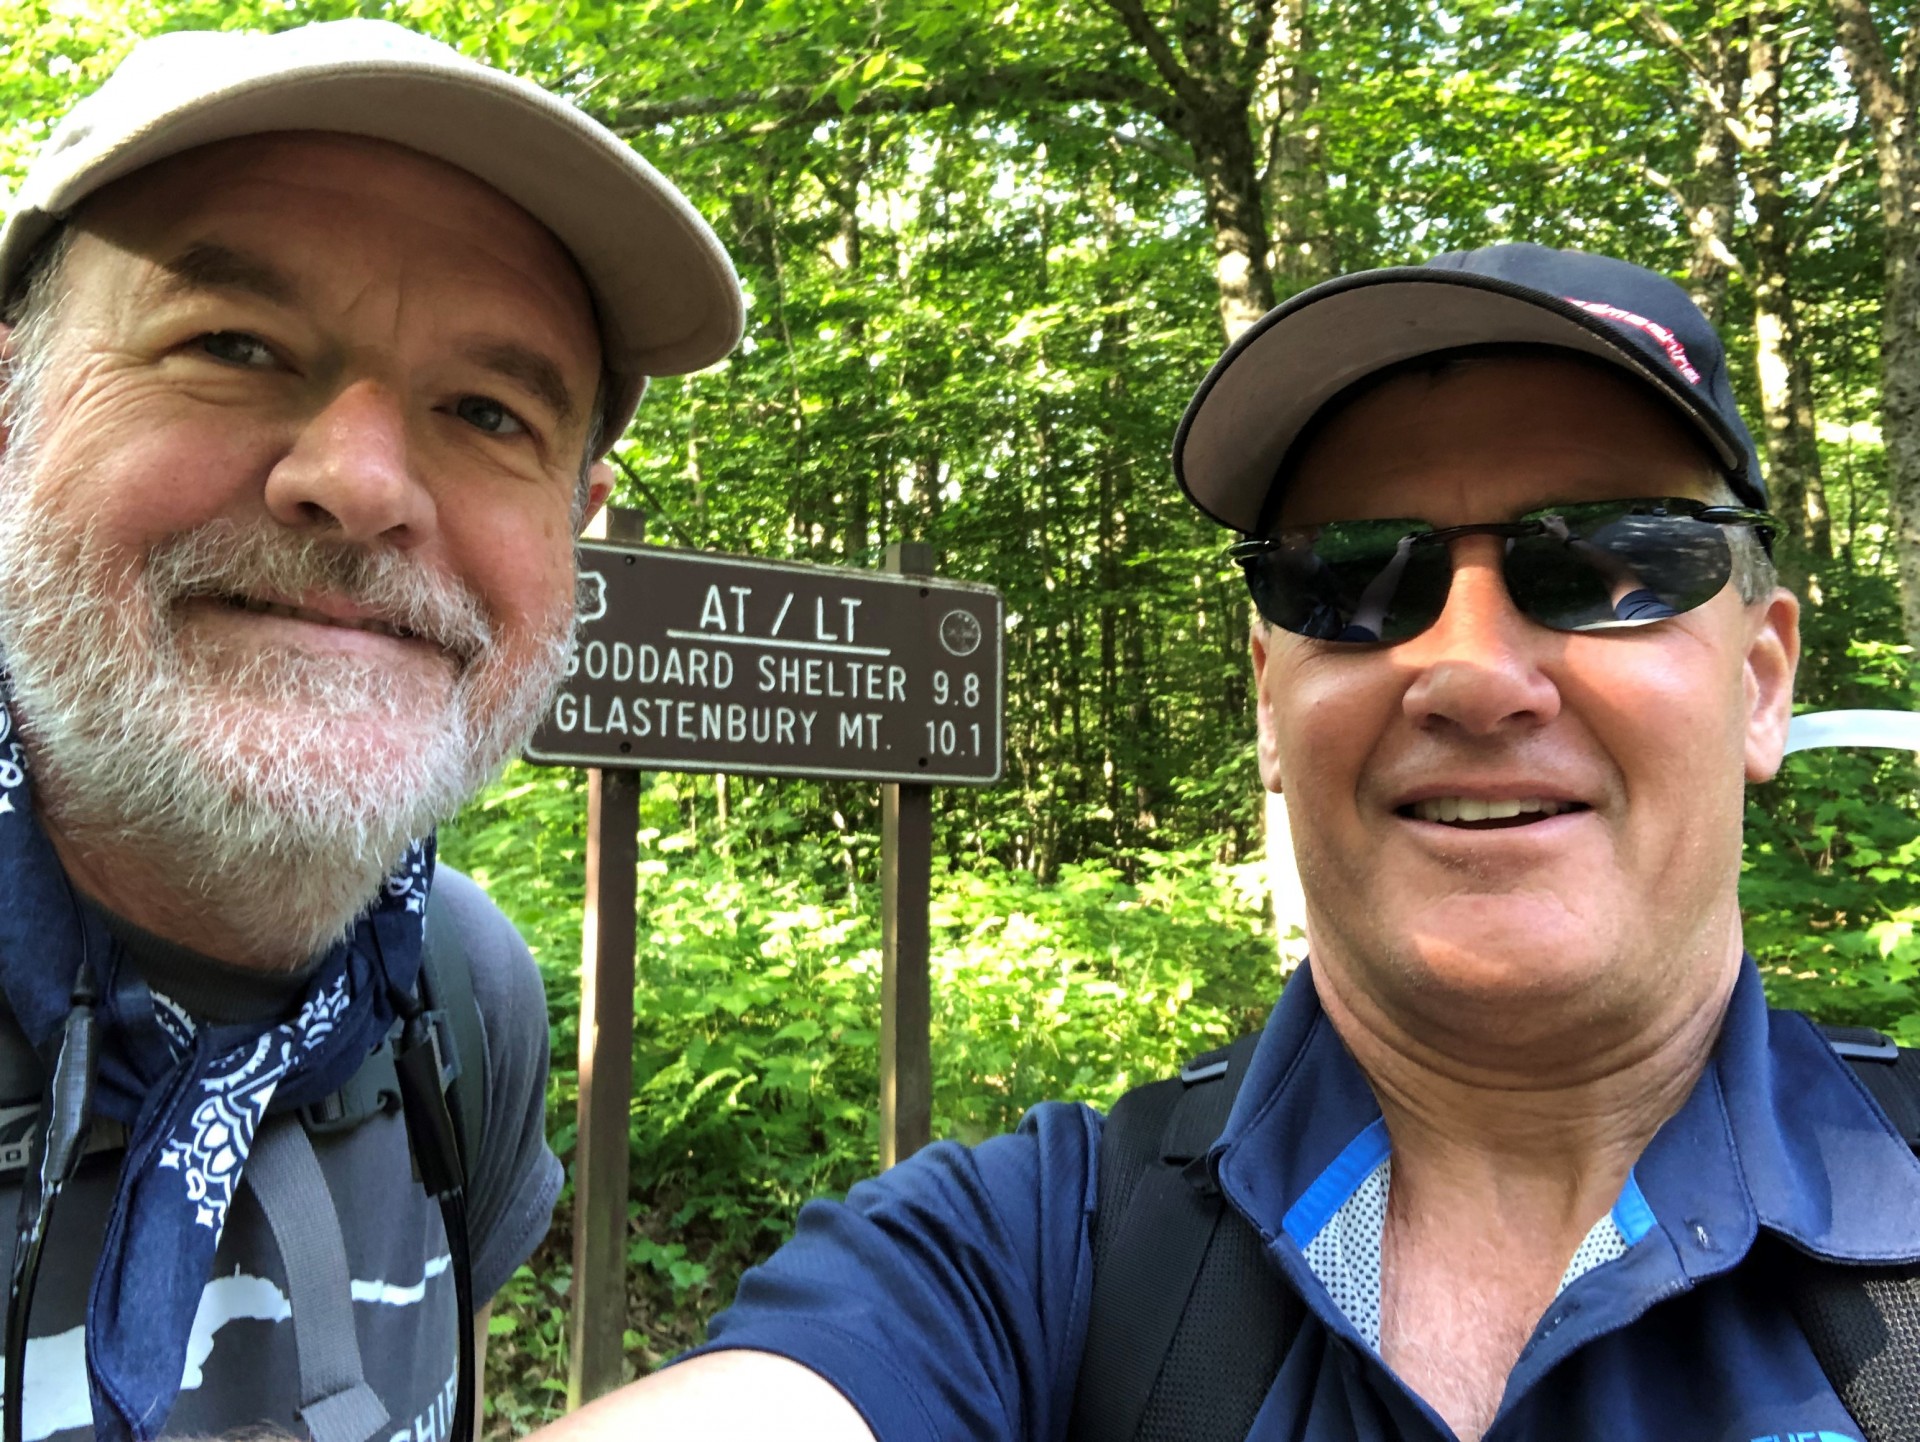 OR&L supports Chris Ulbrich in his hike along the Appalachian Trail to support Wallingford homeless shelter